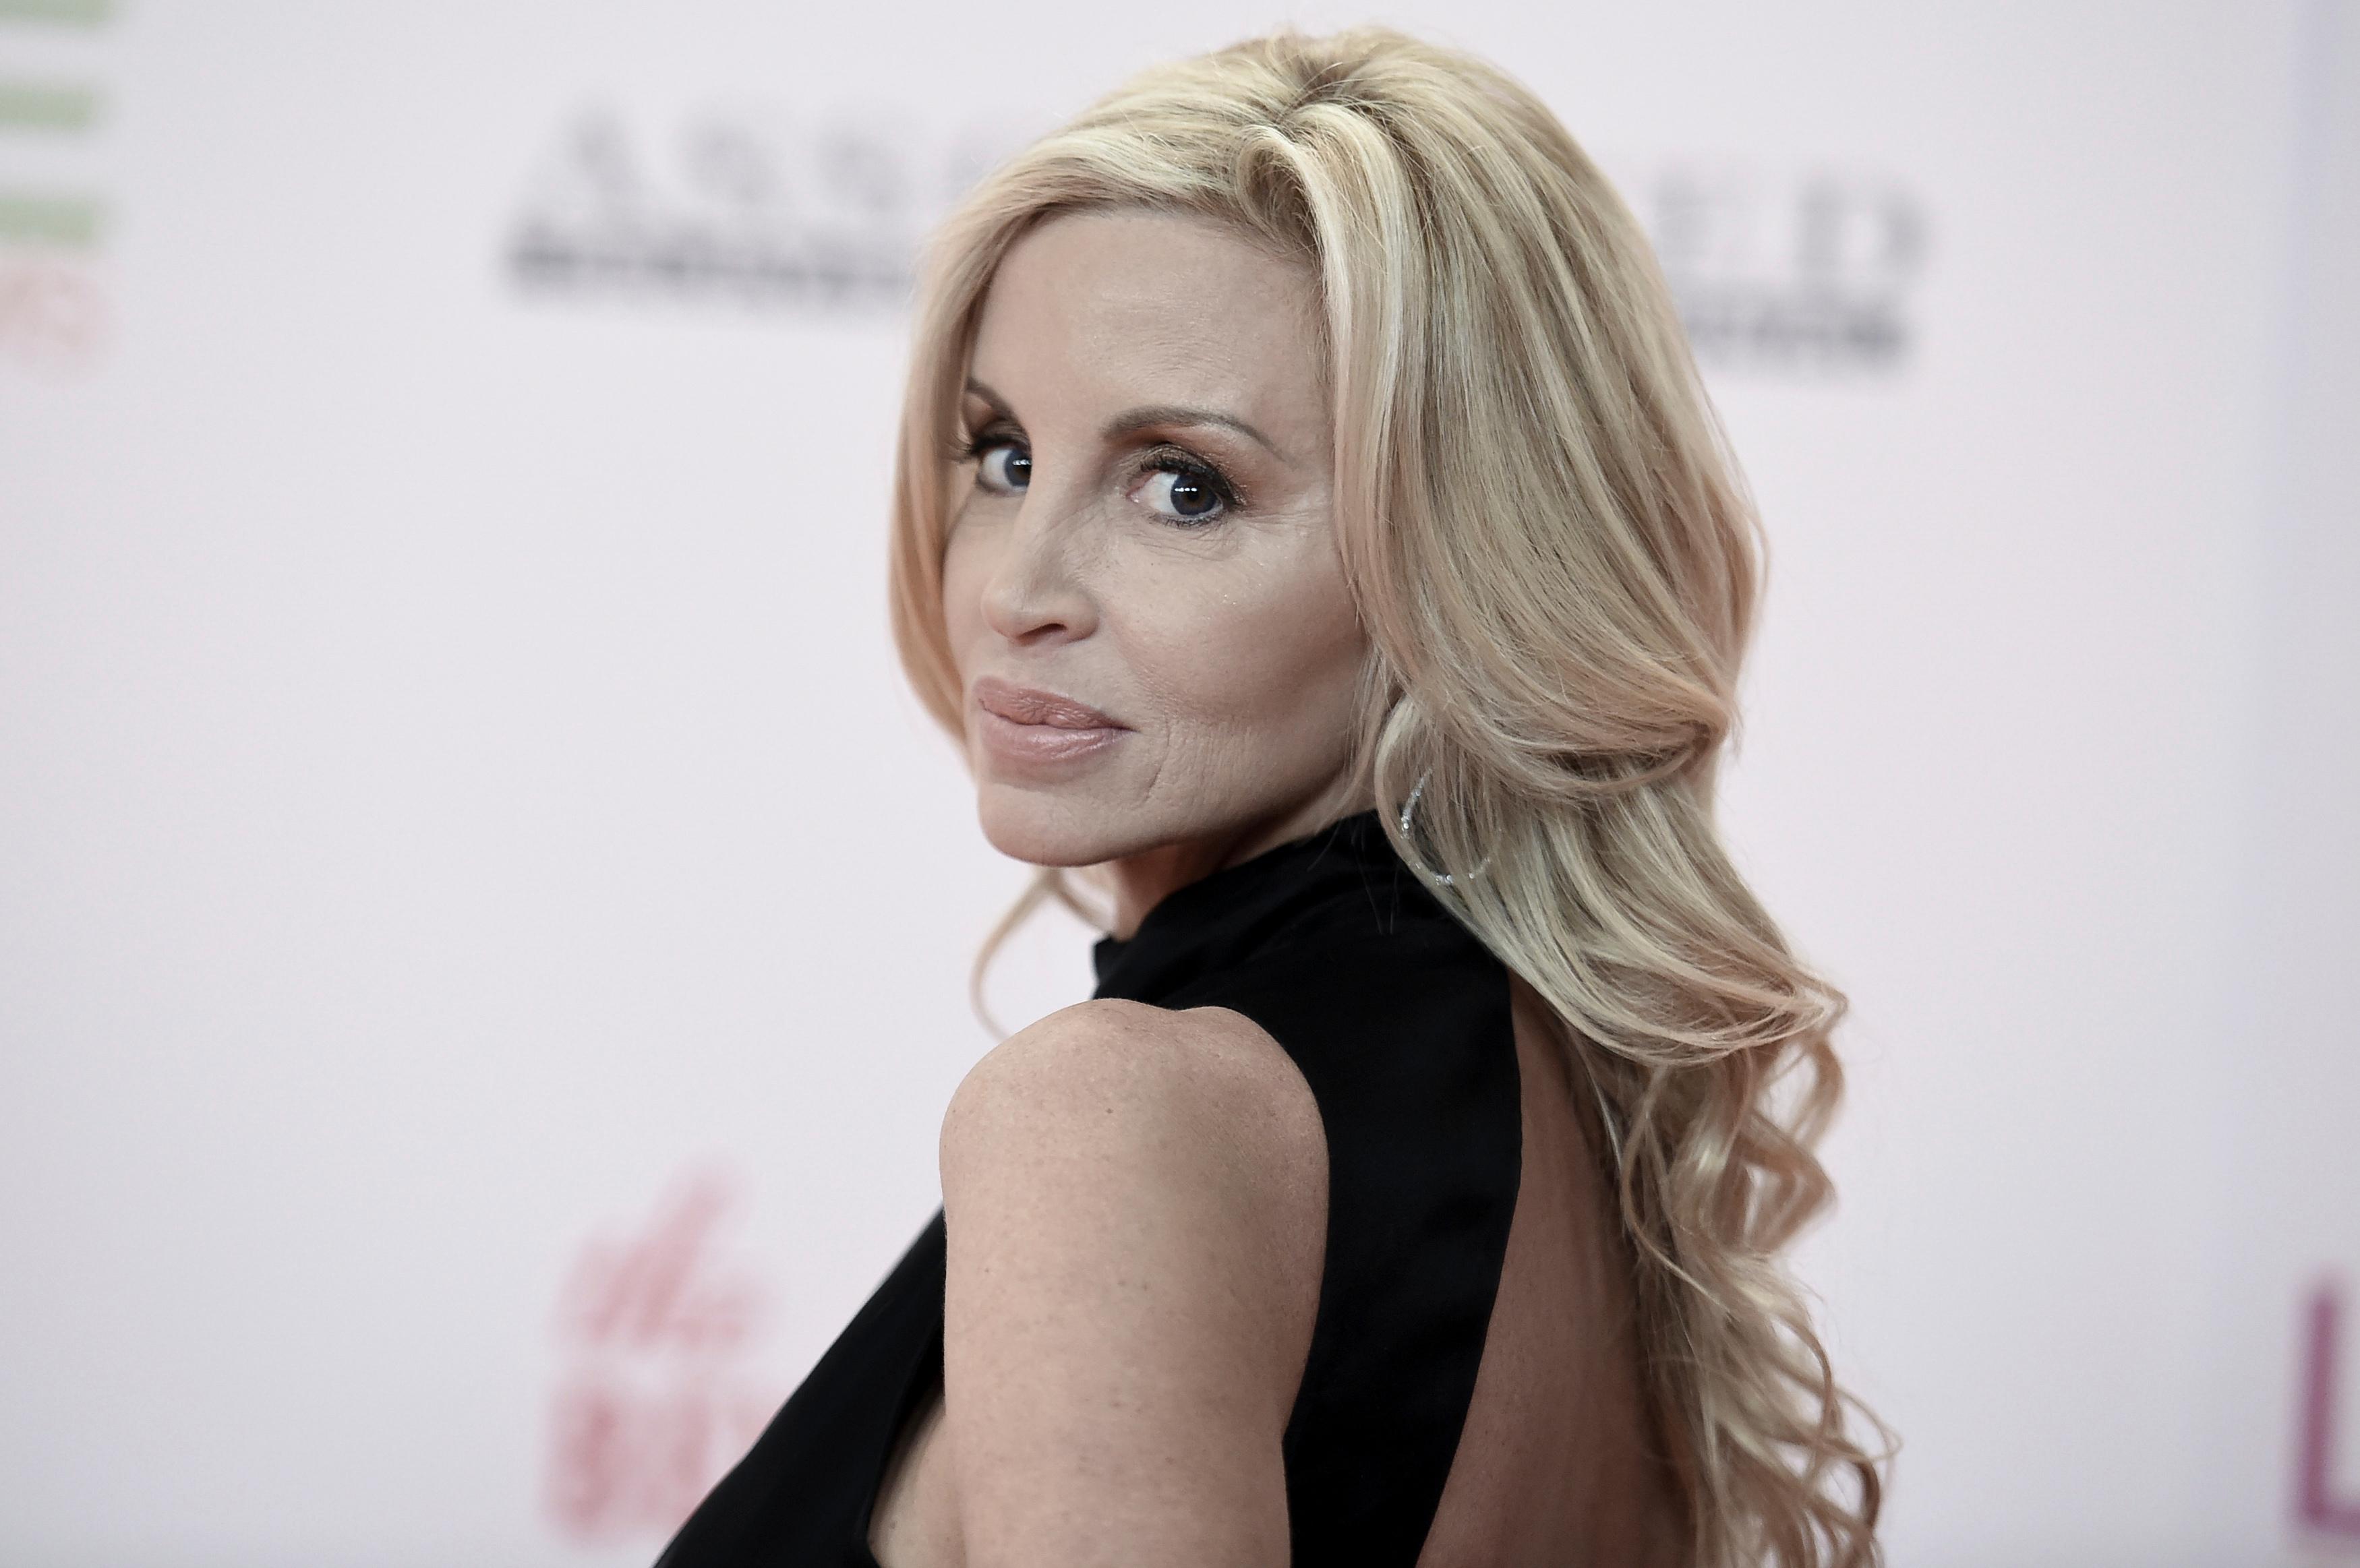 Camille Grammer Tearfully Apologizes To RHOBH Cast Mates At Reunion